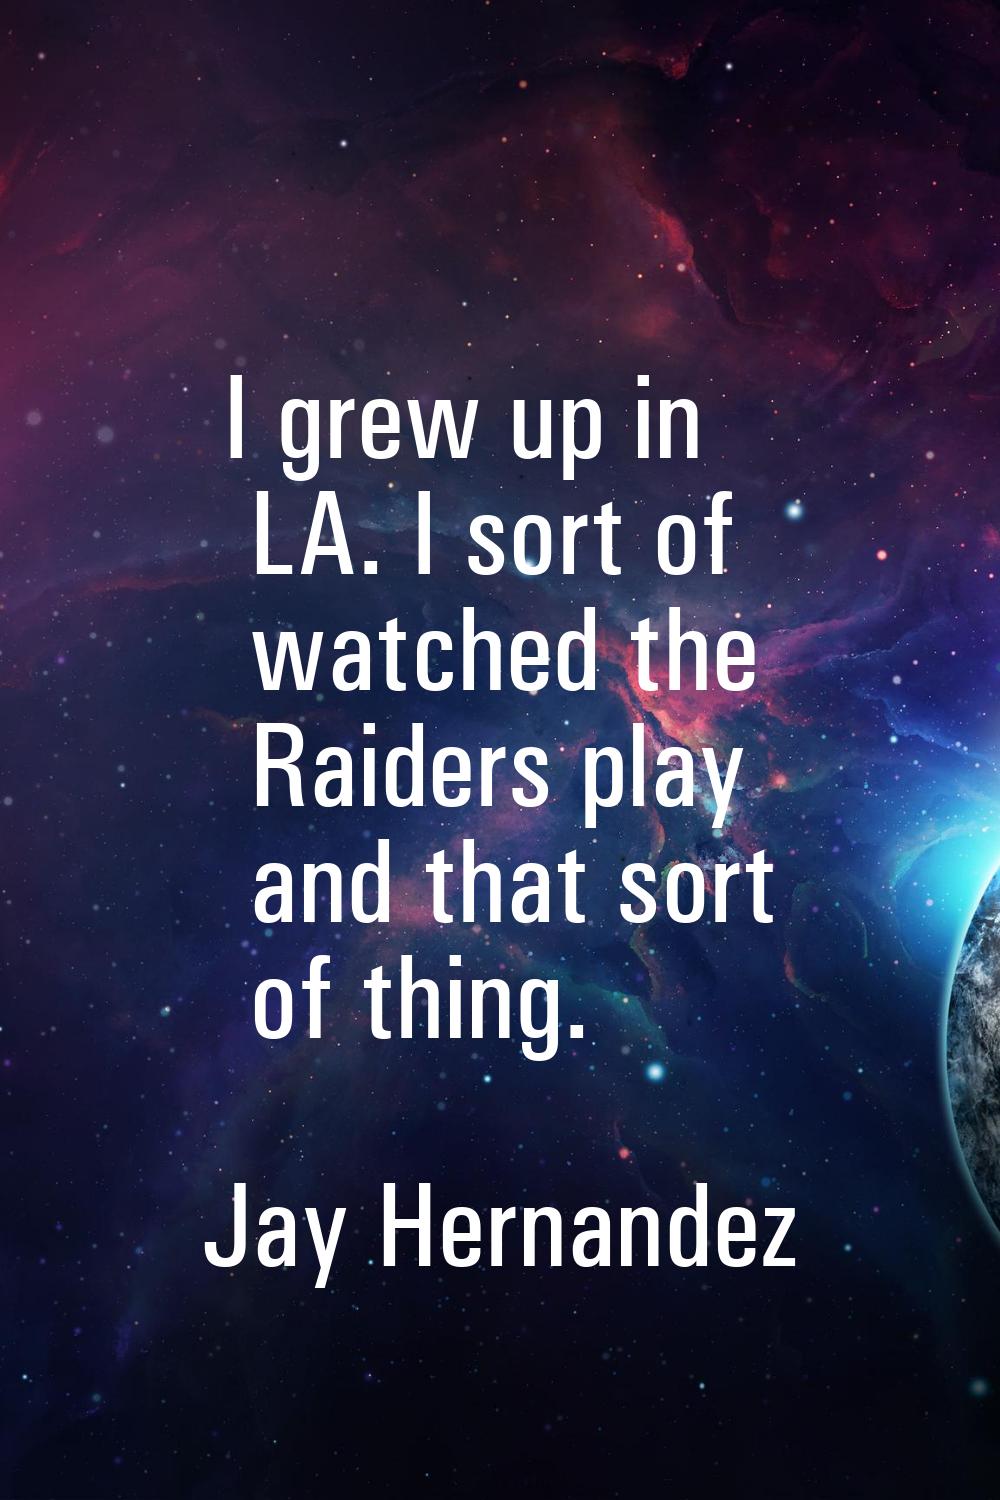 I grew up in LA. I sort of watched the Raiders play and that sort of thing.